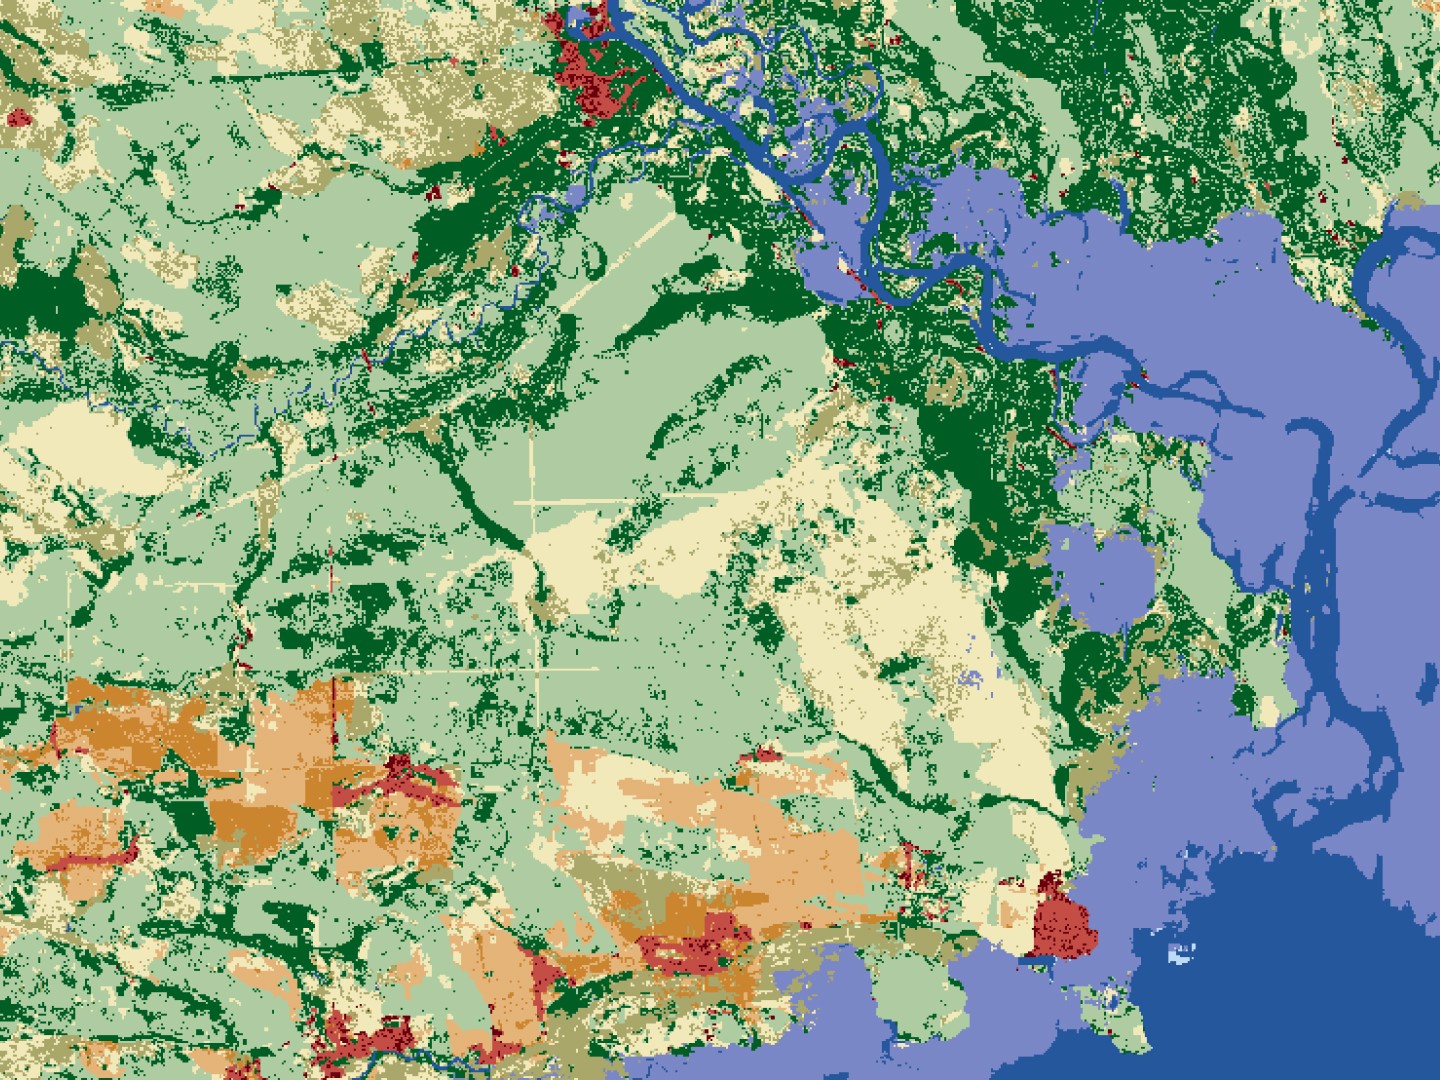 example of food and farming through the use of IOs land use land cover map